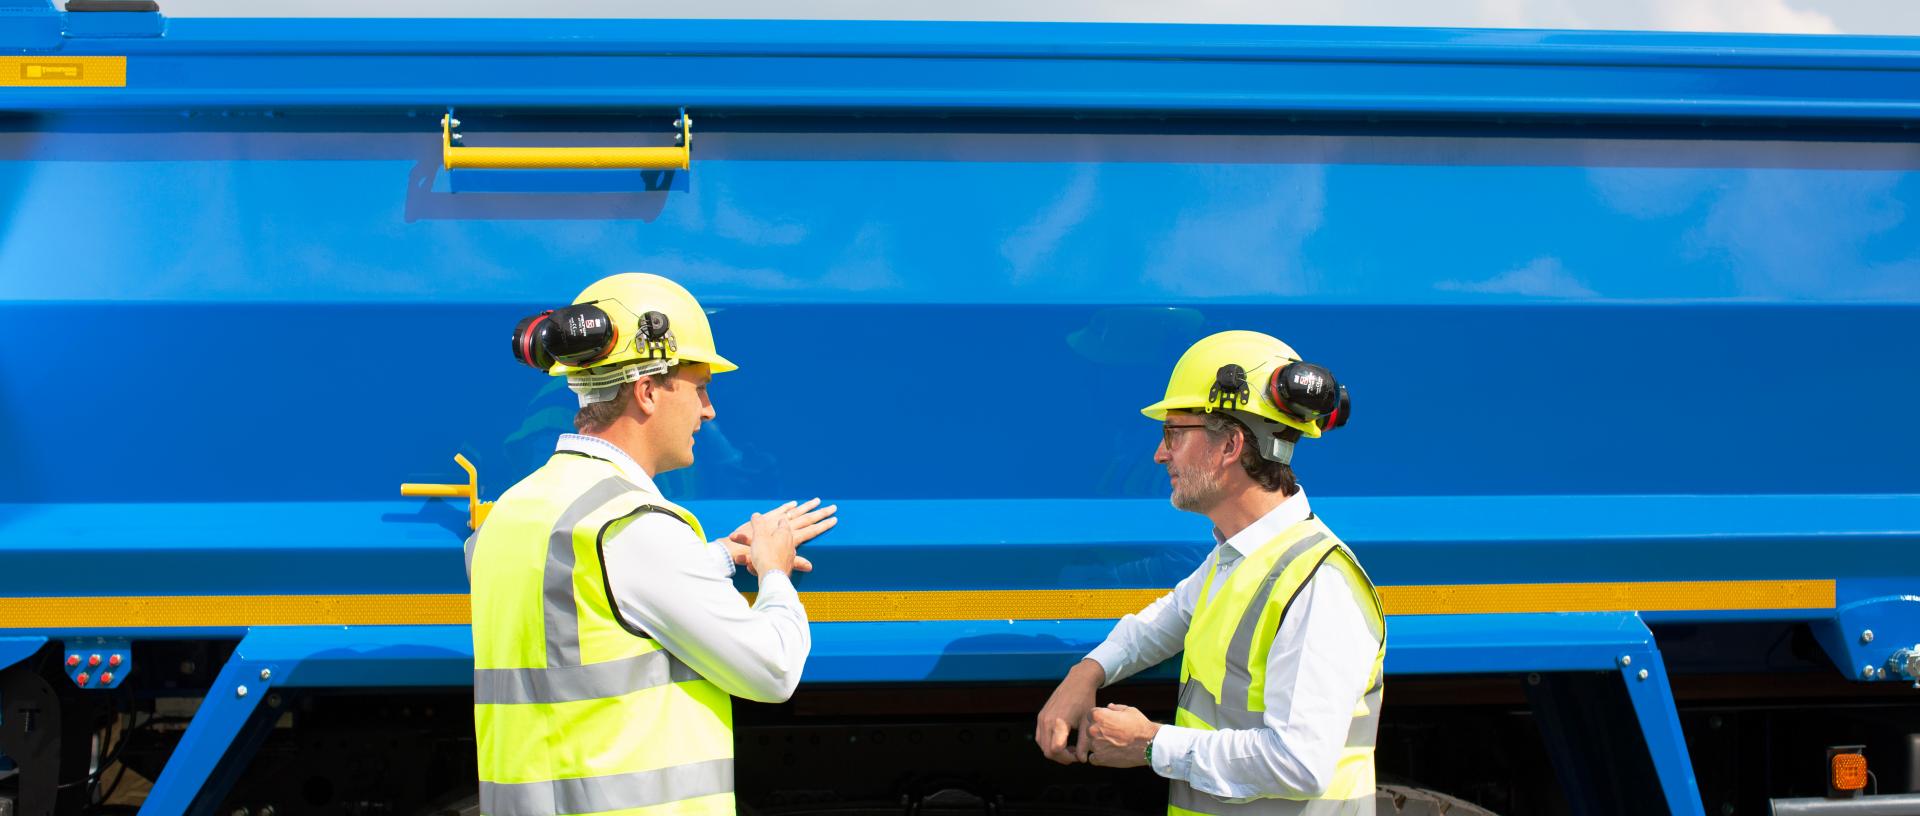 Two operatives having a conversation at the side of a blue tipper truck with a Valast surface finish